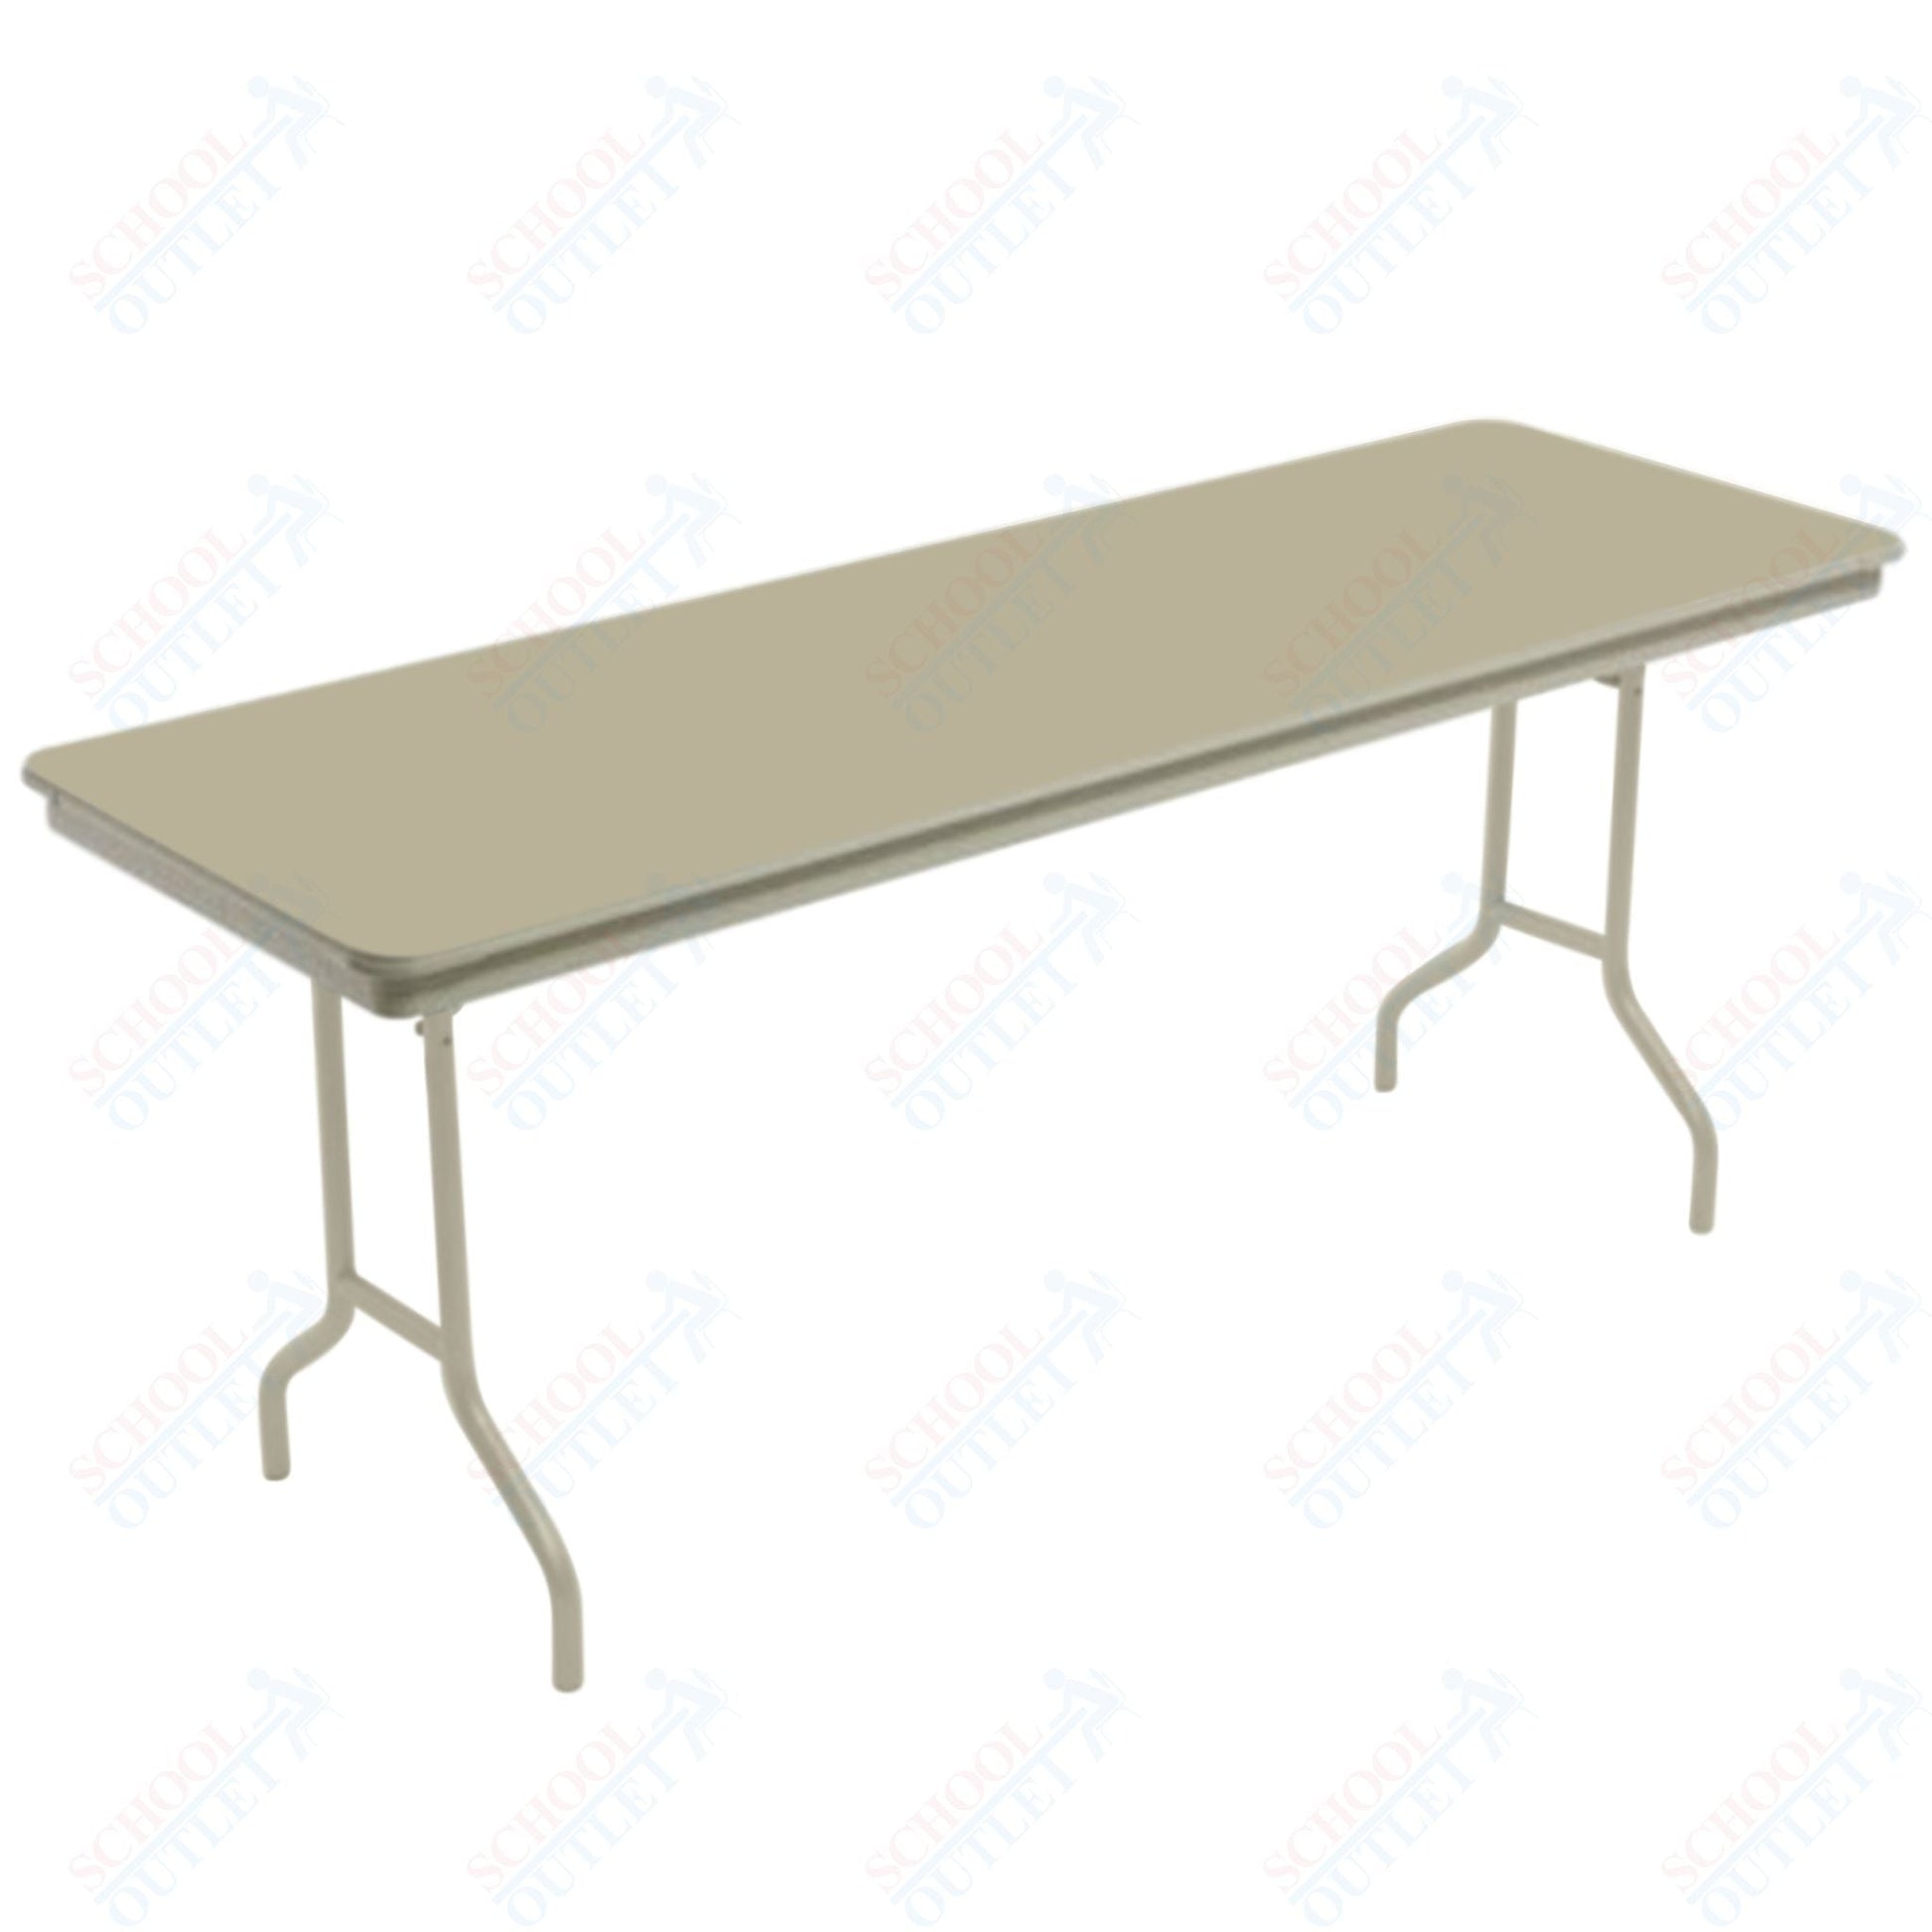 AmTab Dynalite Featherweight Heavy-Duty ABS Plastic Folding Table - Rectangle - 18"W x 60"L x 29"H (AmTab AMT-185DL) - SchoolOutlet